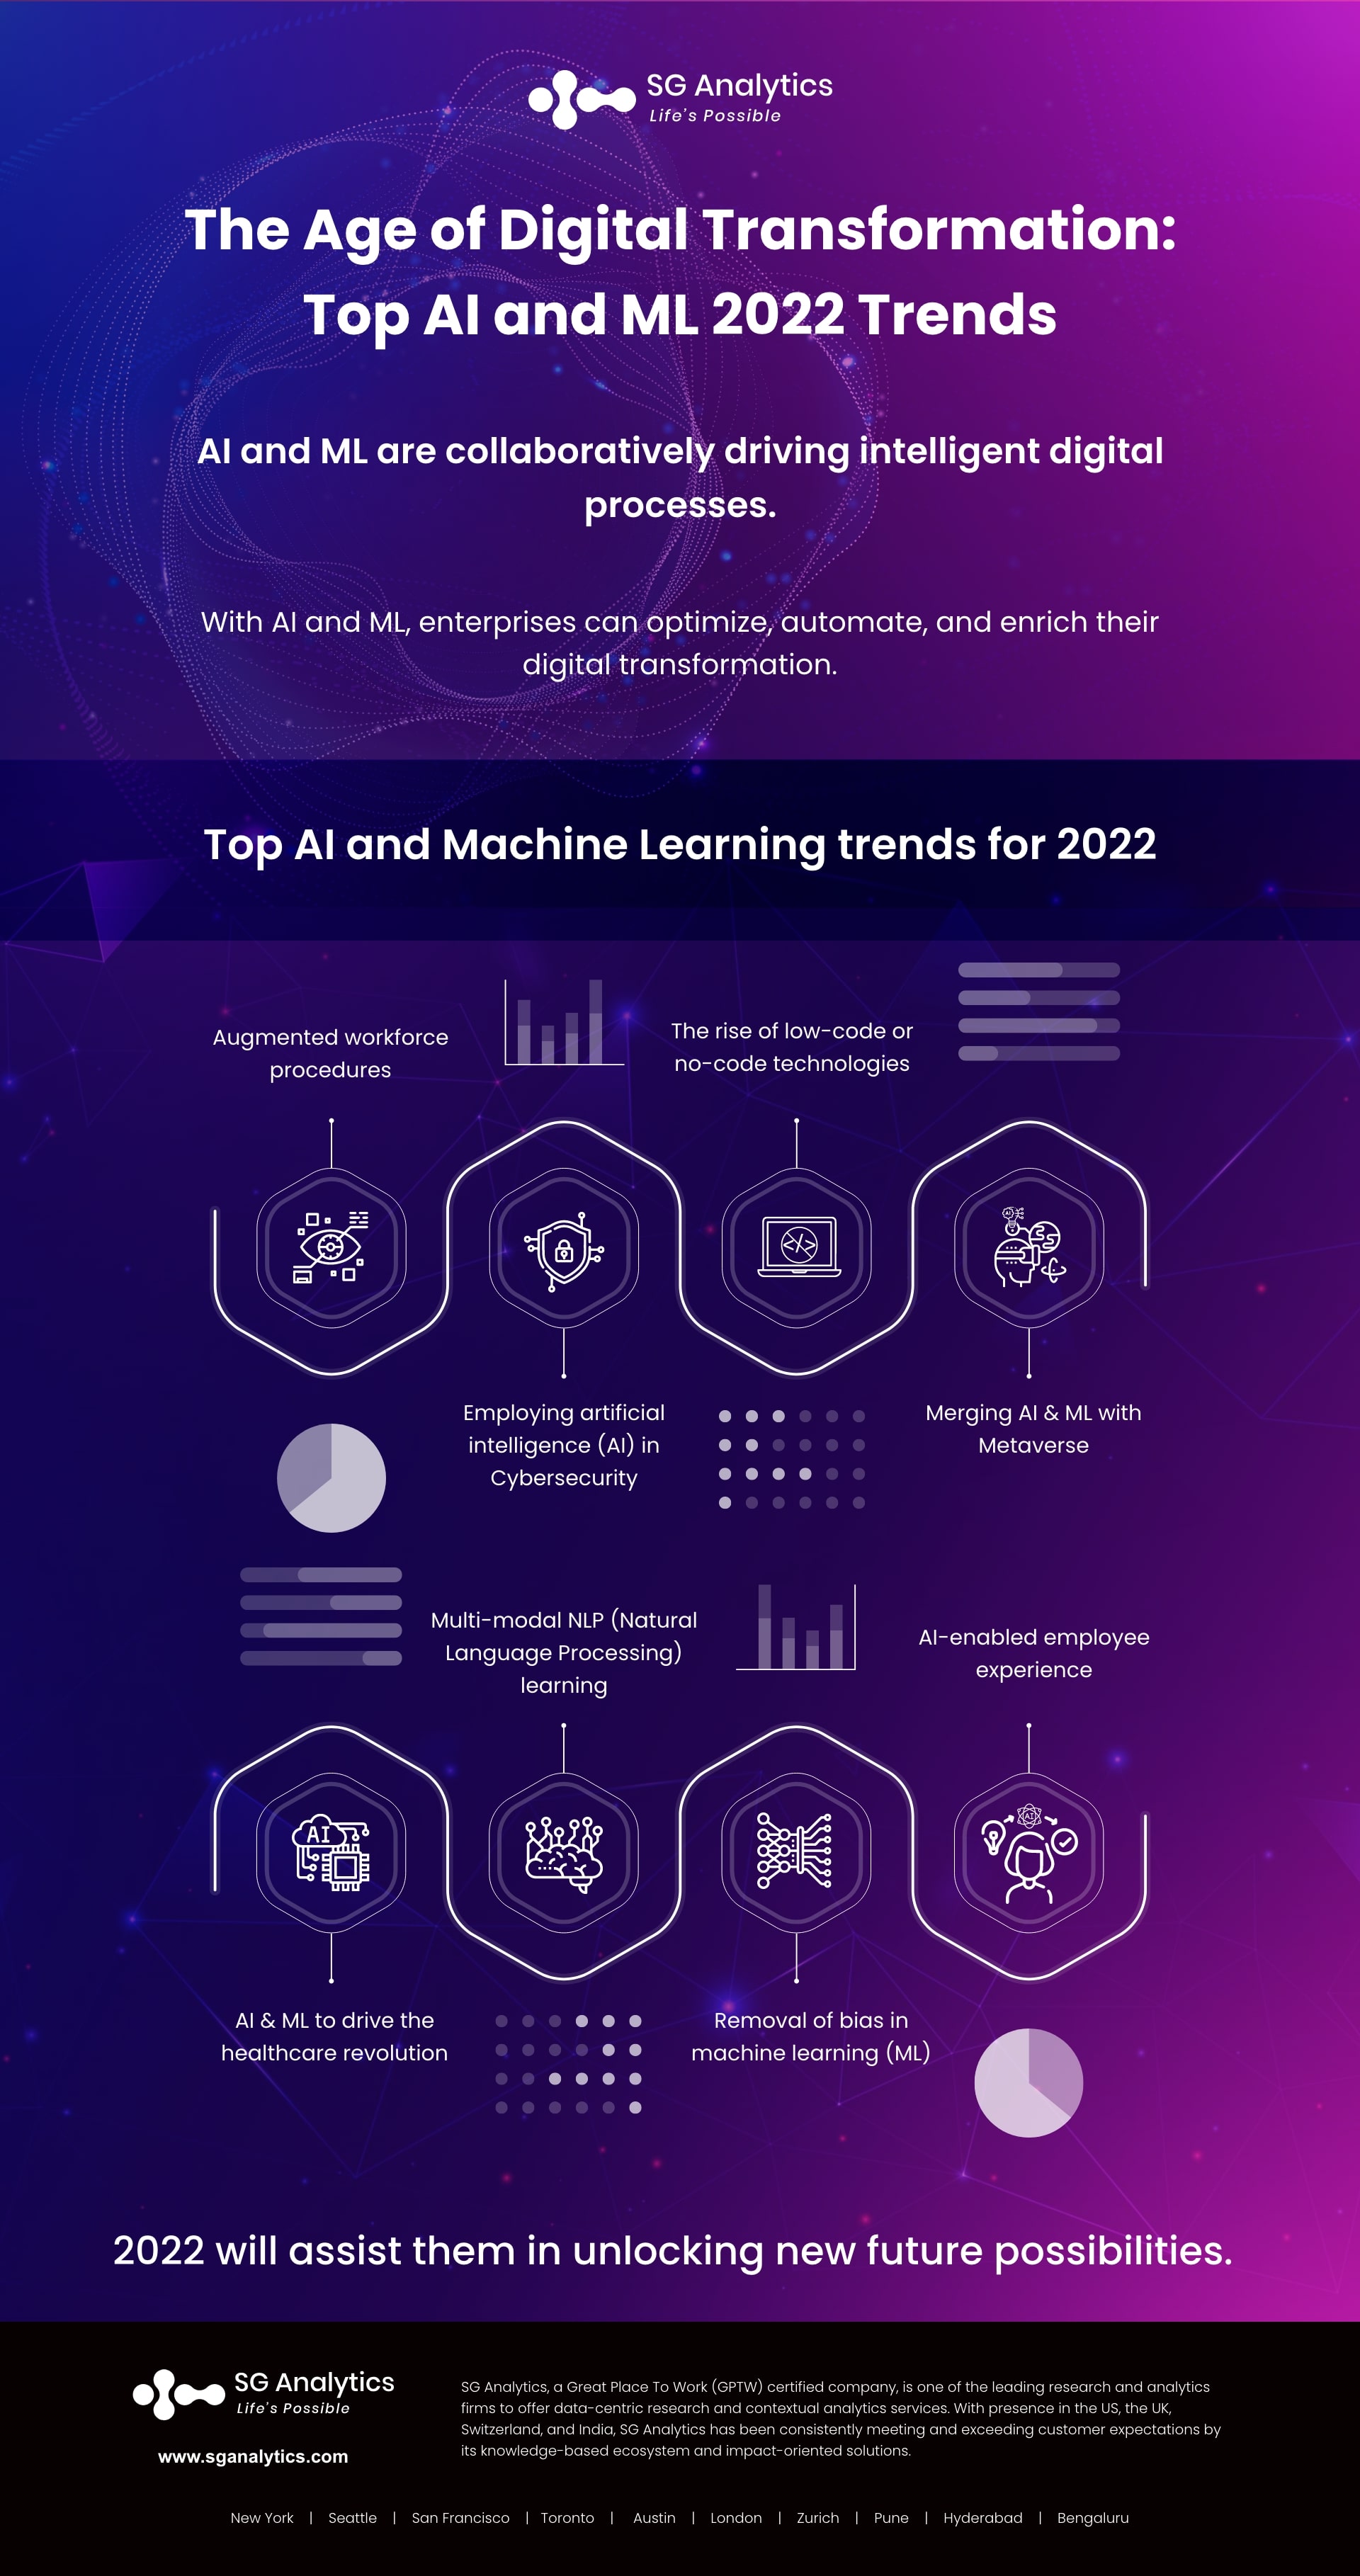 The Age of Digital Transformation; Top AI and ML Trends 2022